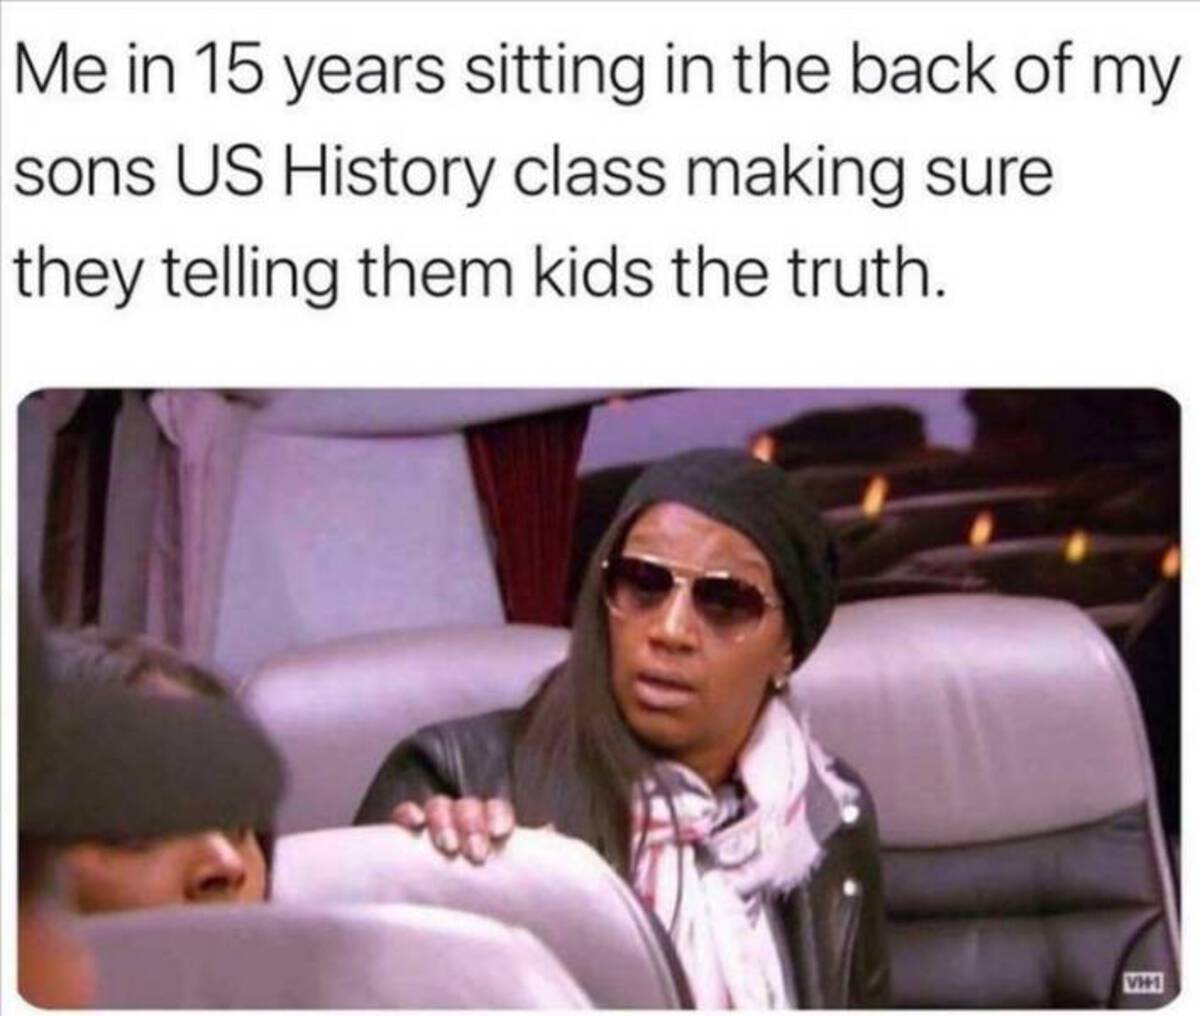 photo caption - Me in 15 years sitting in the back of my sons Us History class making sure they telling them kids the truth. VH1